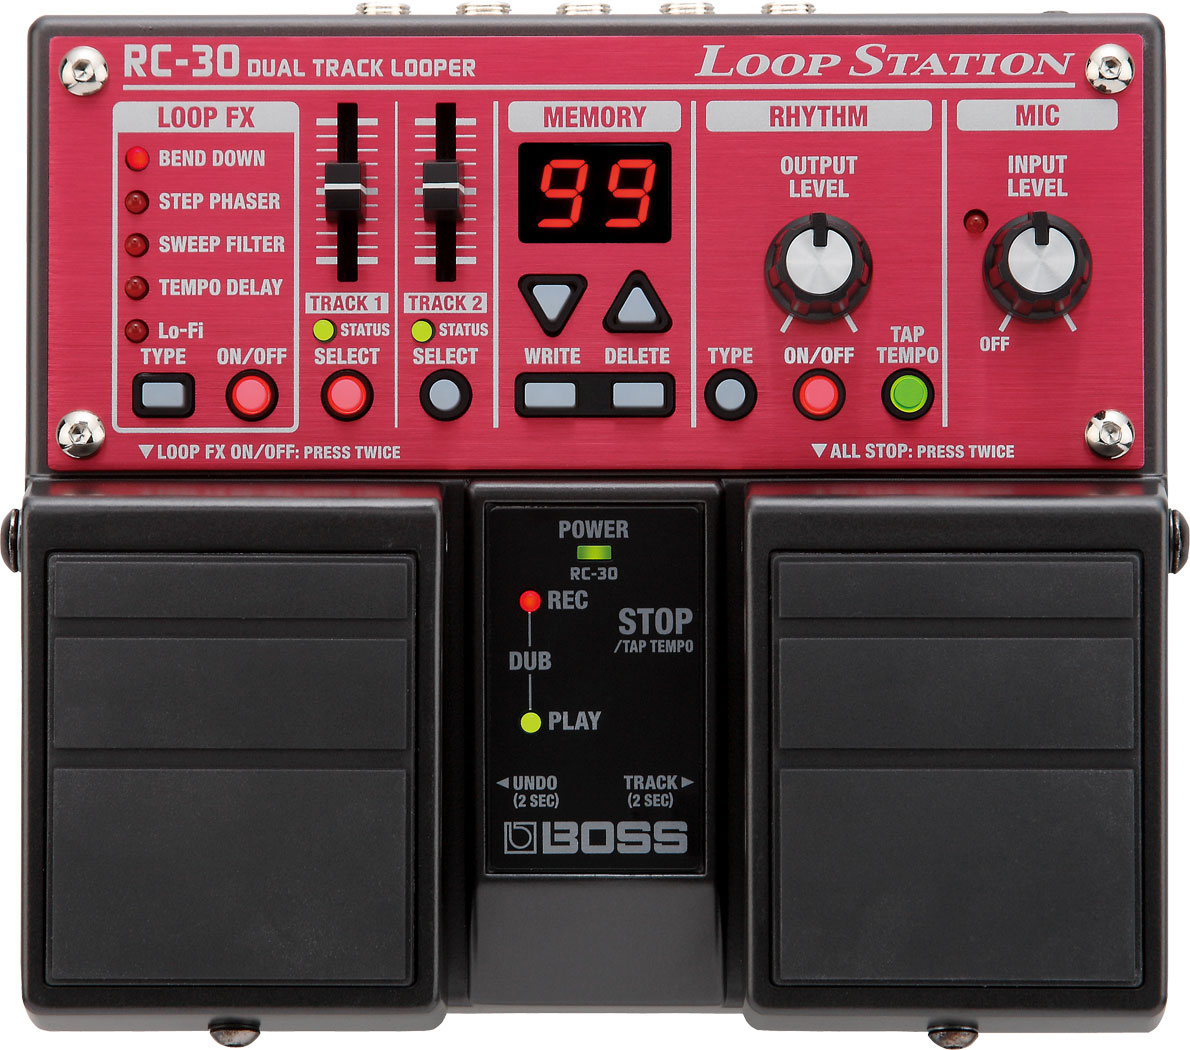 loop station recensione loopstation confronto boss rc-30 looper rc30